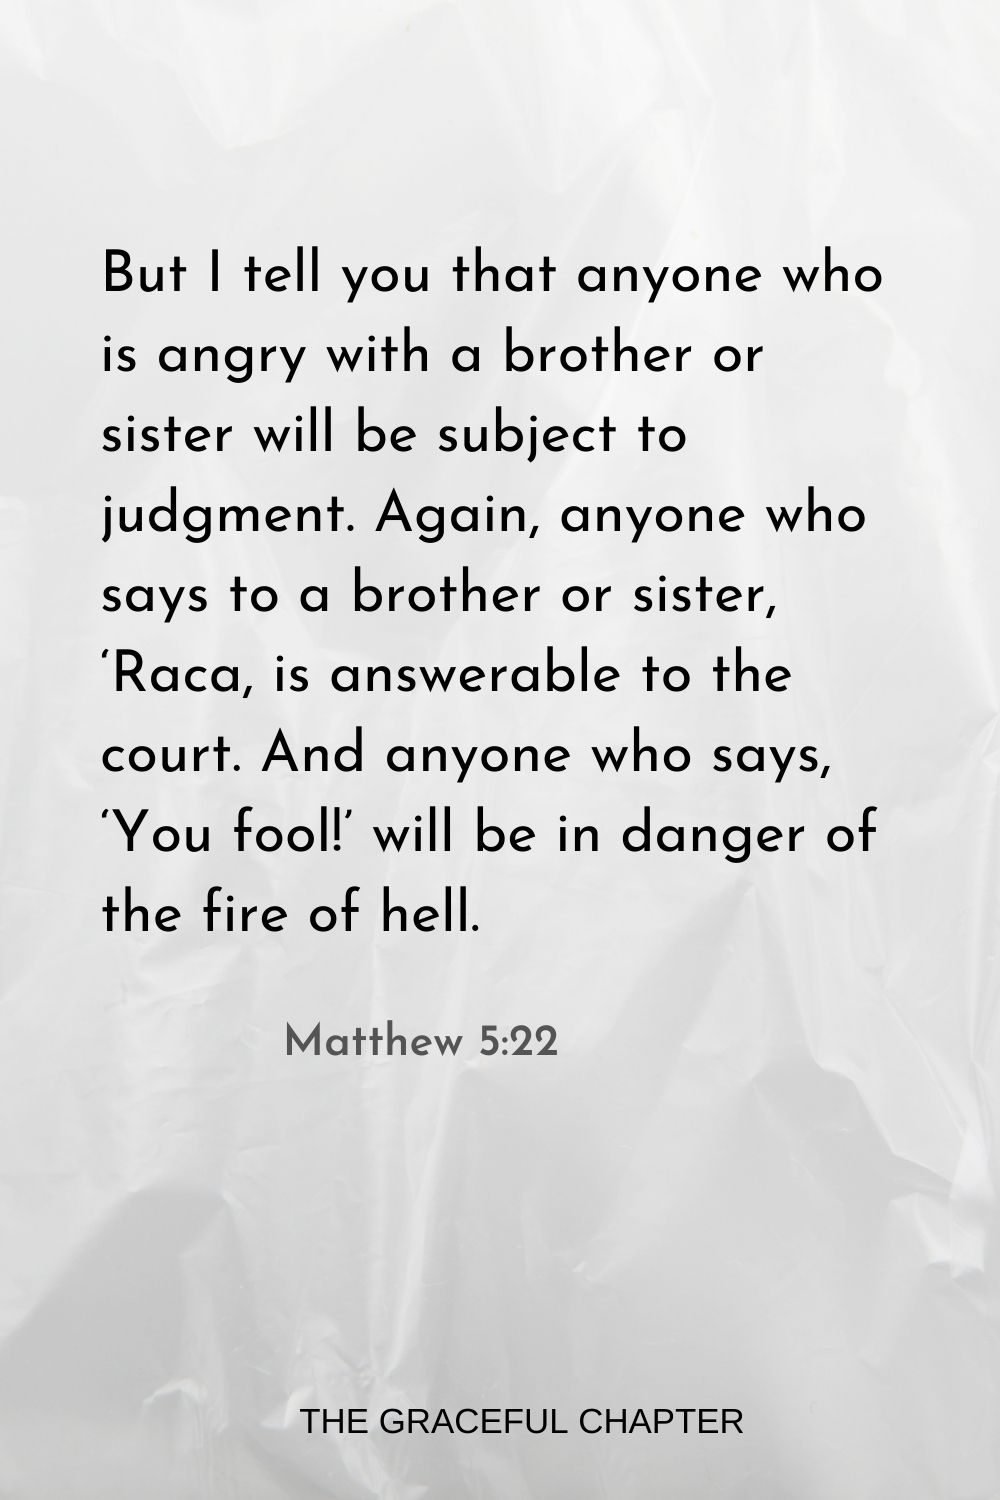 But I tell you that anyone who is angry with a brother or sister will be subject to judgment. Again, anyone who says to a brother or sister, ‘Raca, is answerable to the court. And anyone who says, ‘You fool!’ will be in danger of the fire of hell. Matthew 5:22